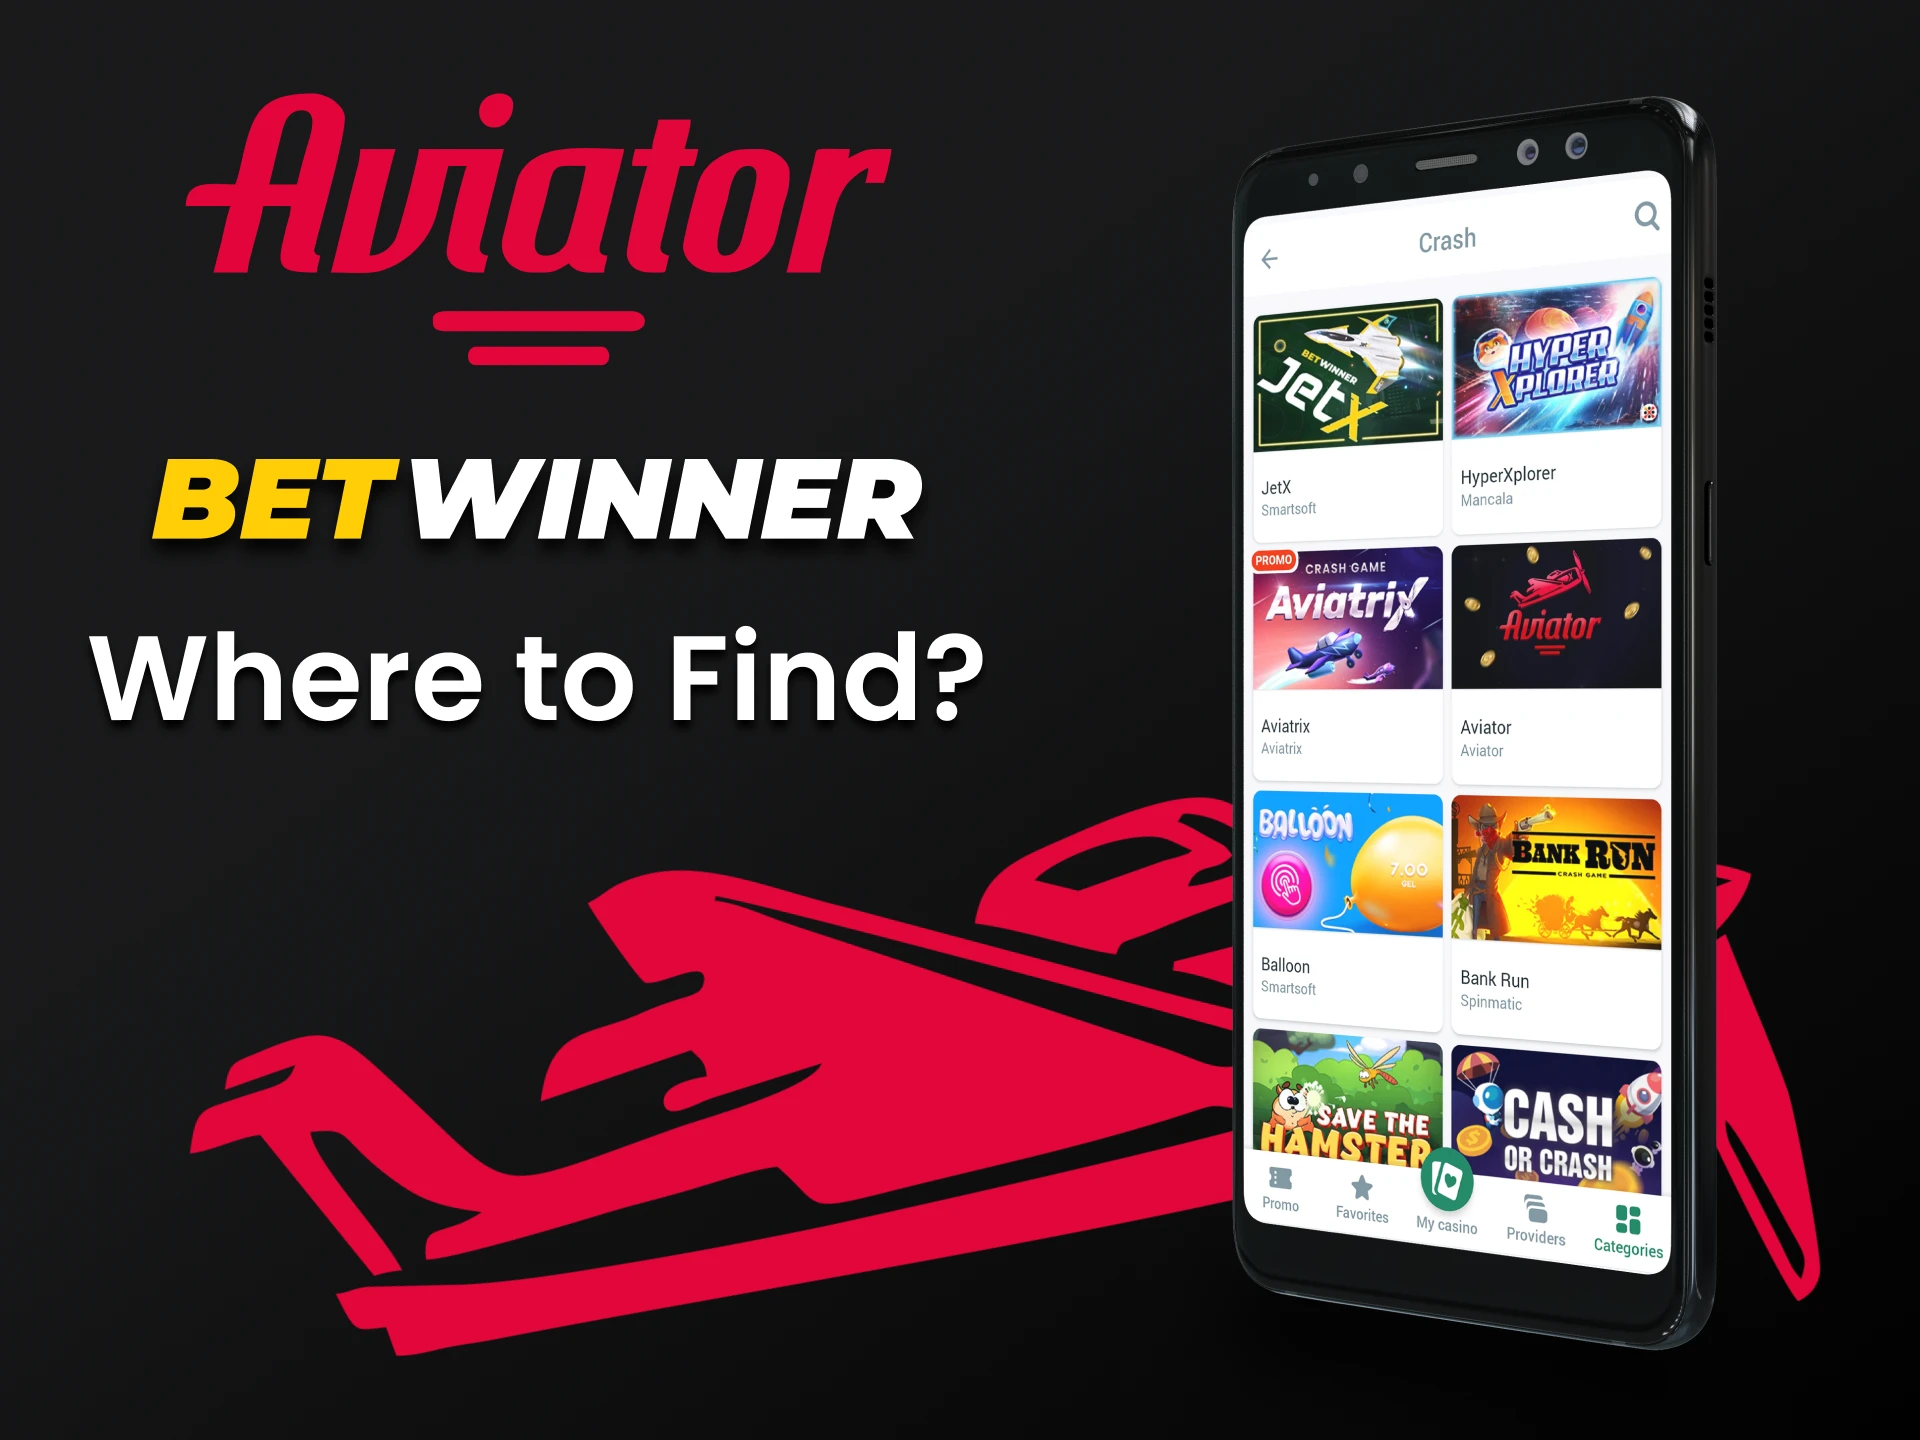 Go to the games section in the Betwinner application to play Aviator.